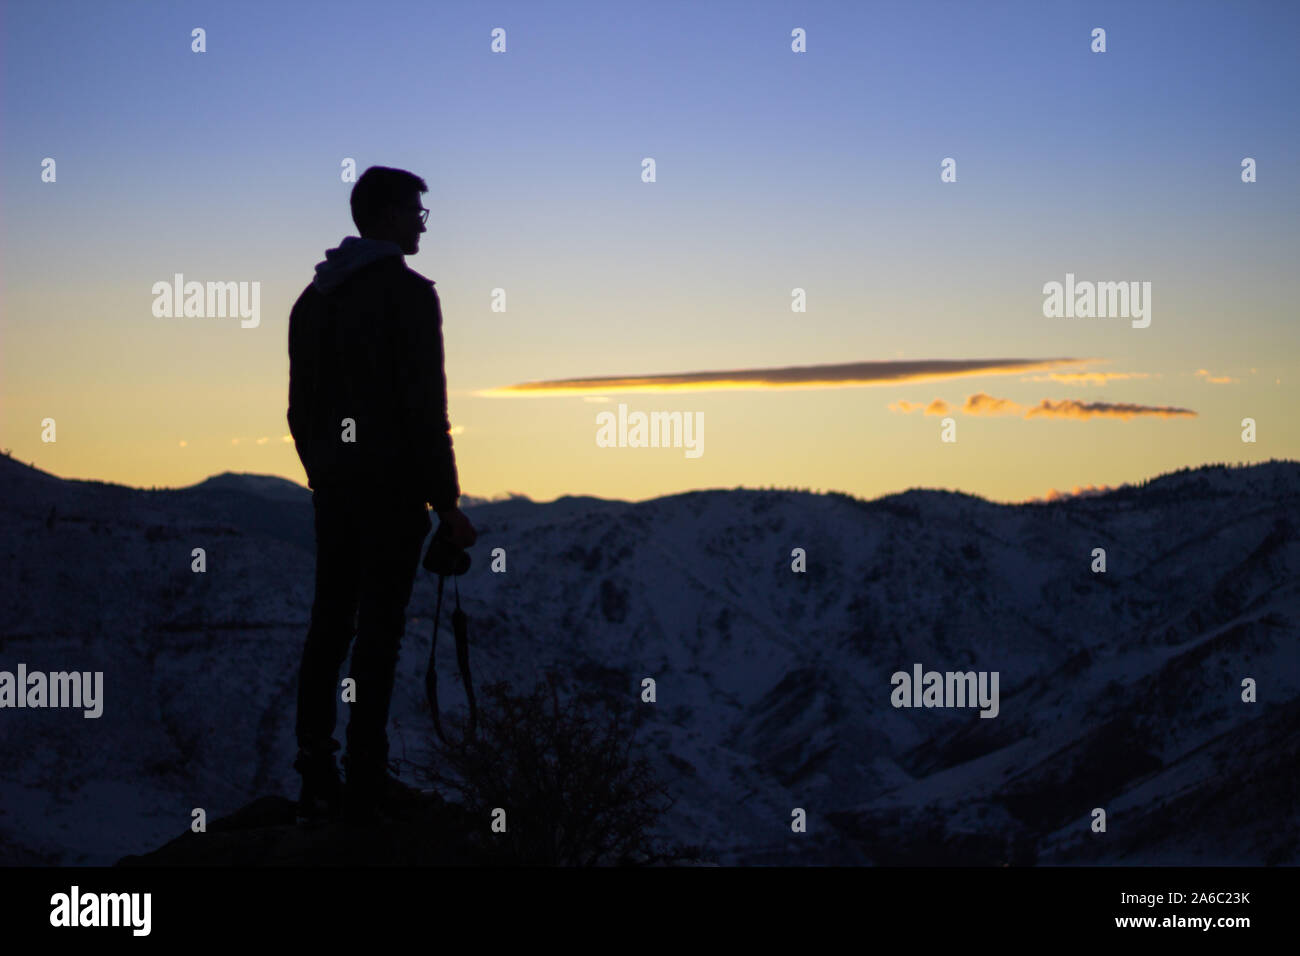 Silhouette of a man looking out over a cliff during sunset Stock Photo